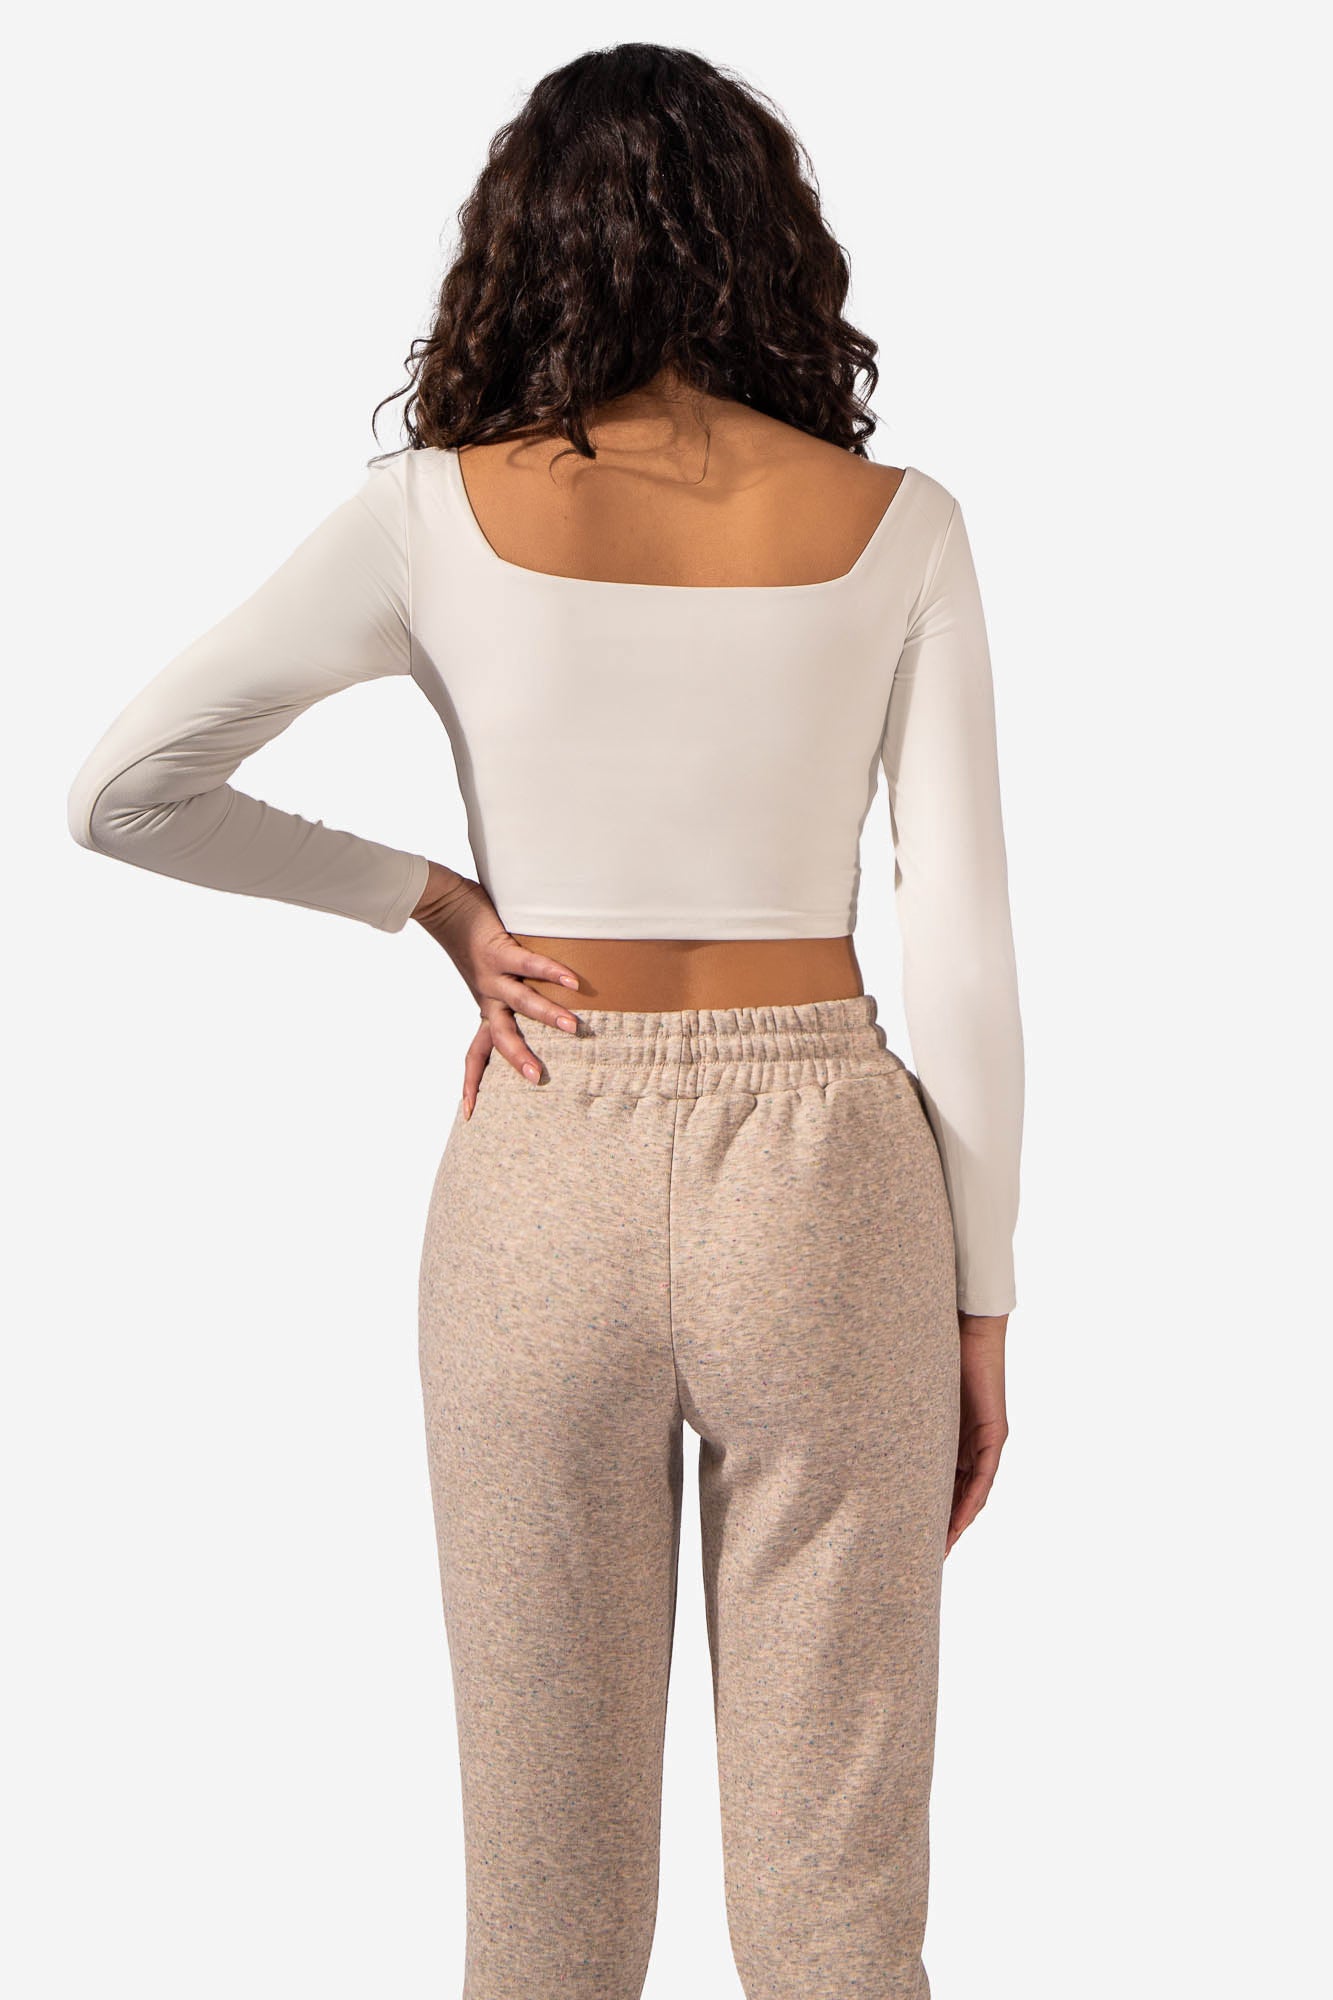 Buy Yellow Parallel Pants Online - Shop for W